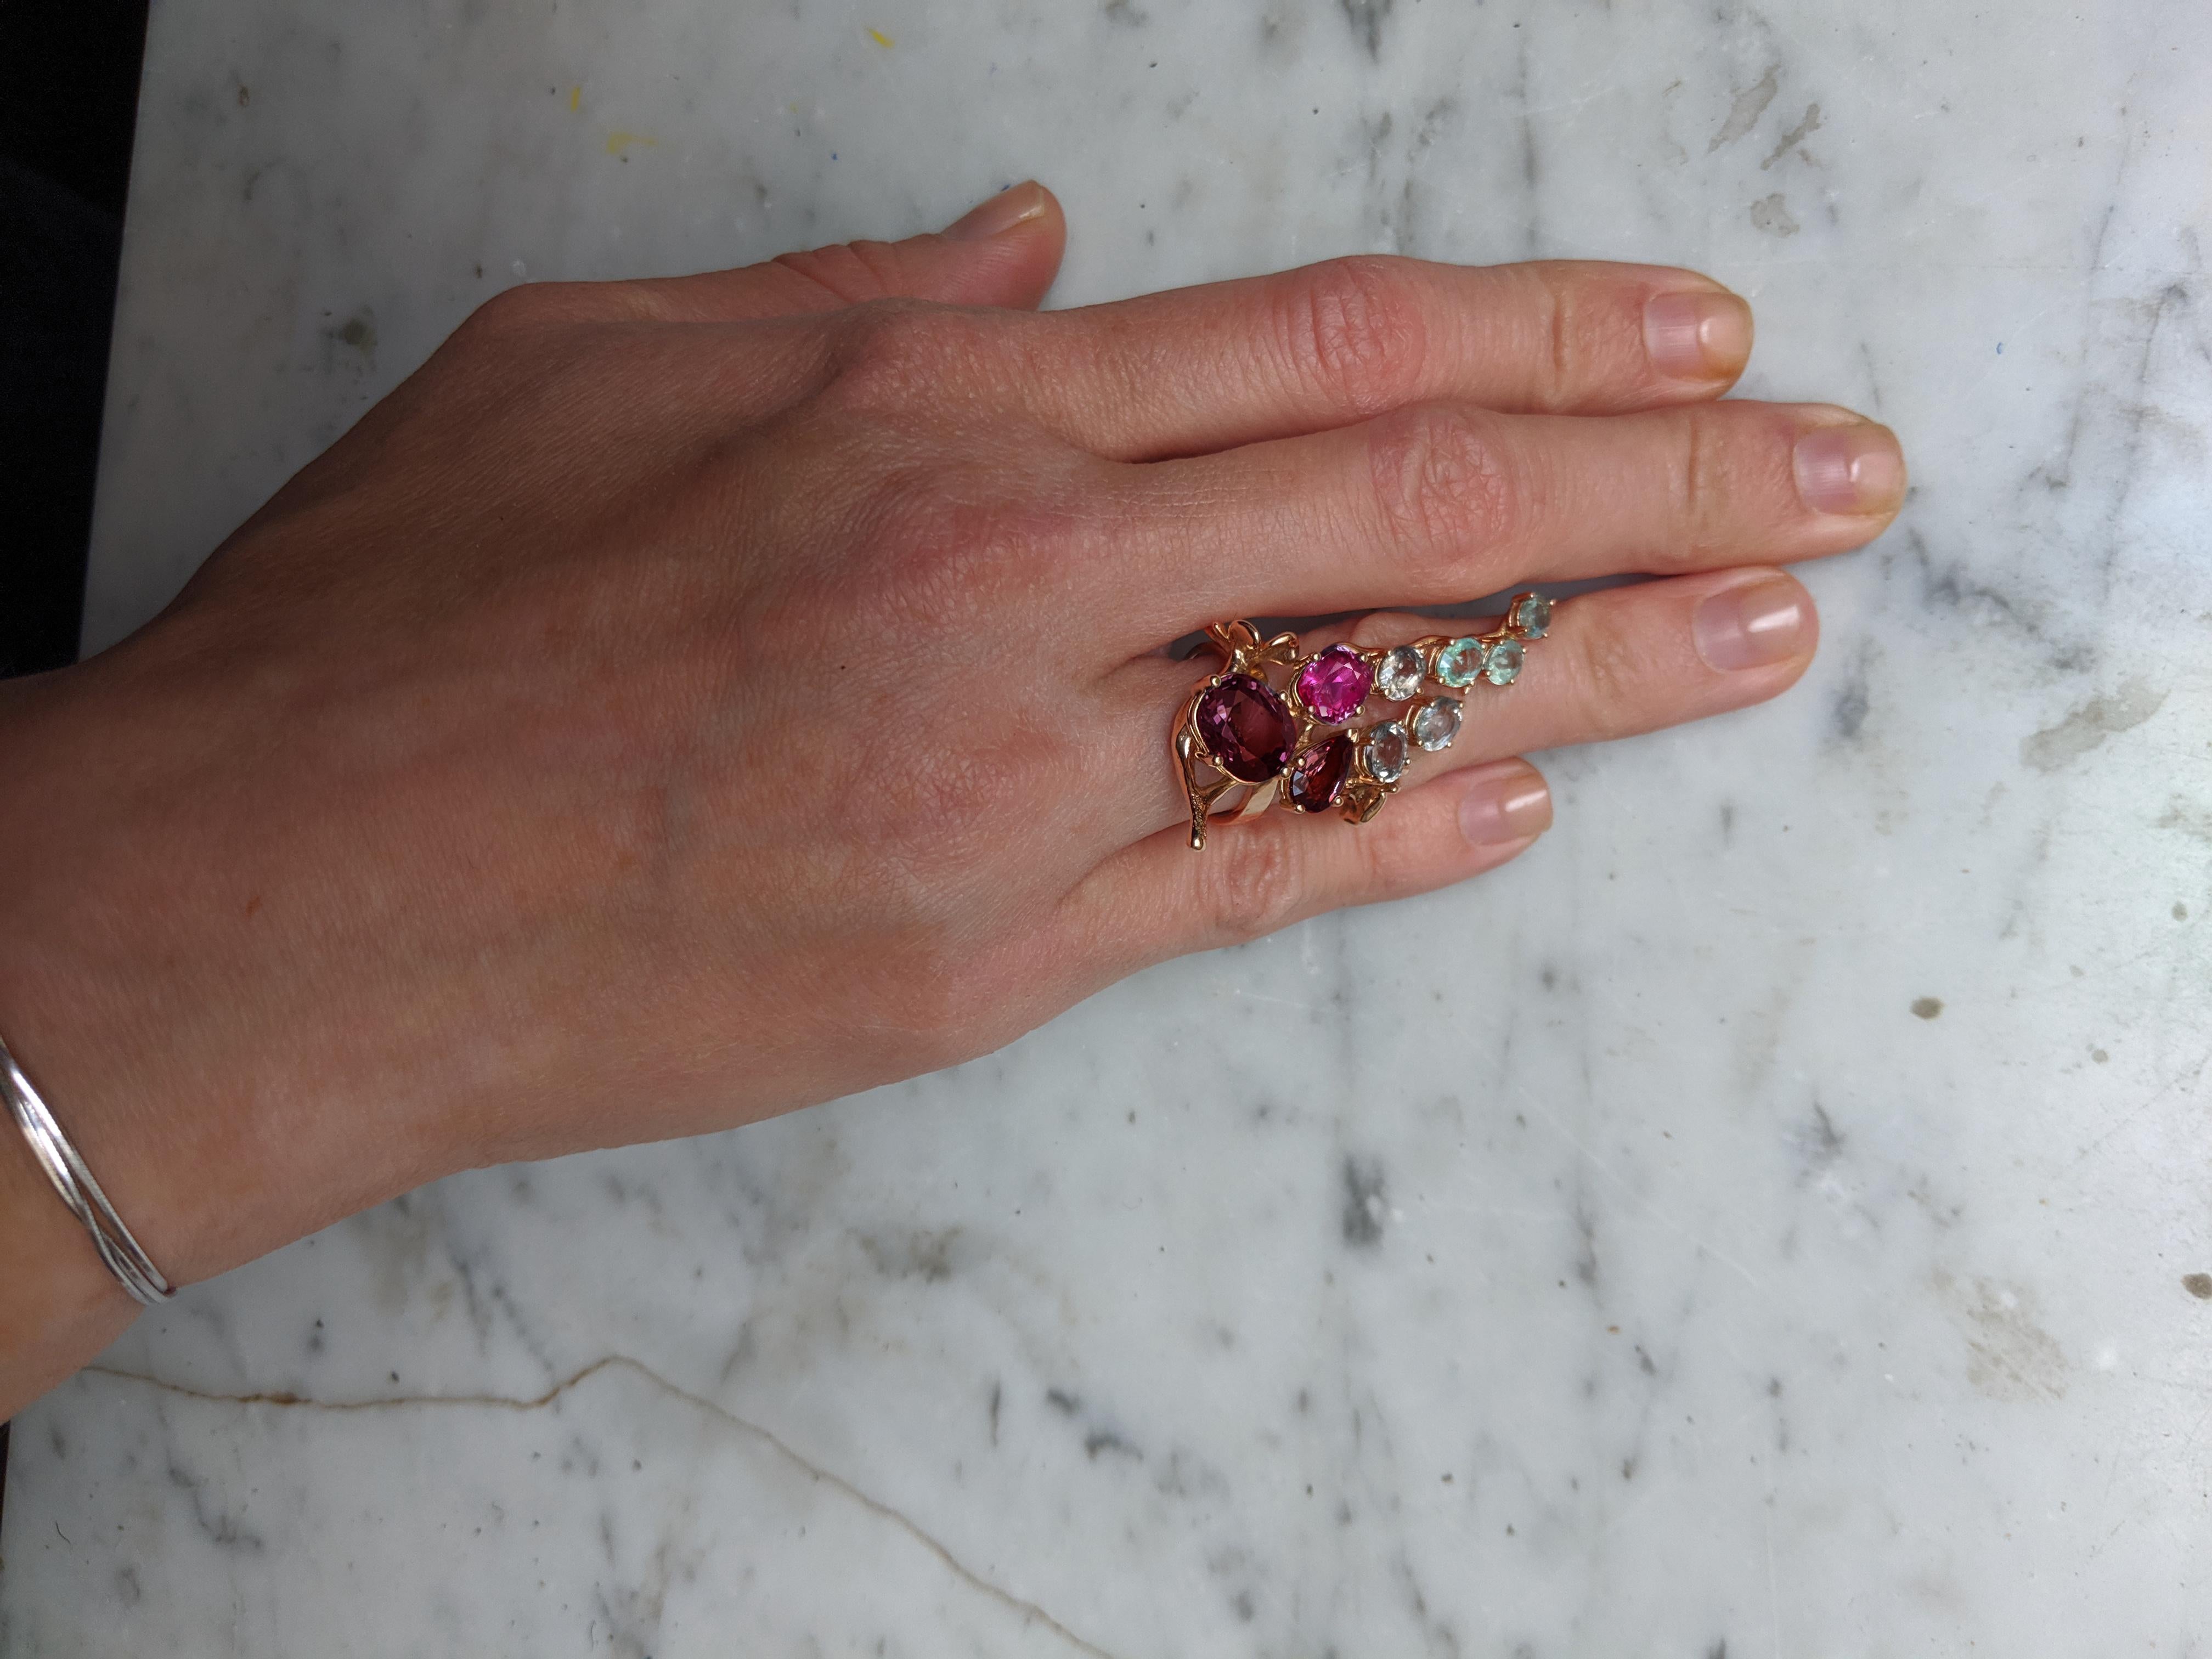 This Tobacco Flower contemporary floral cocktail ring is made of  18 karat rose gold.
The natural gems are:
Oval ruby 4,27 carats, dimension: 11,16x9,36 mm.
Oval ruby 0,98 carats, 7x5,5 mm.
Oval ruby warmer tone, 1,01 carats, 6,5x6 mm.
Pear cut